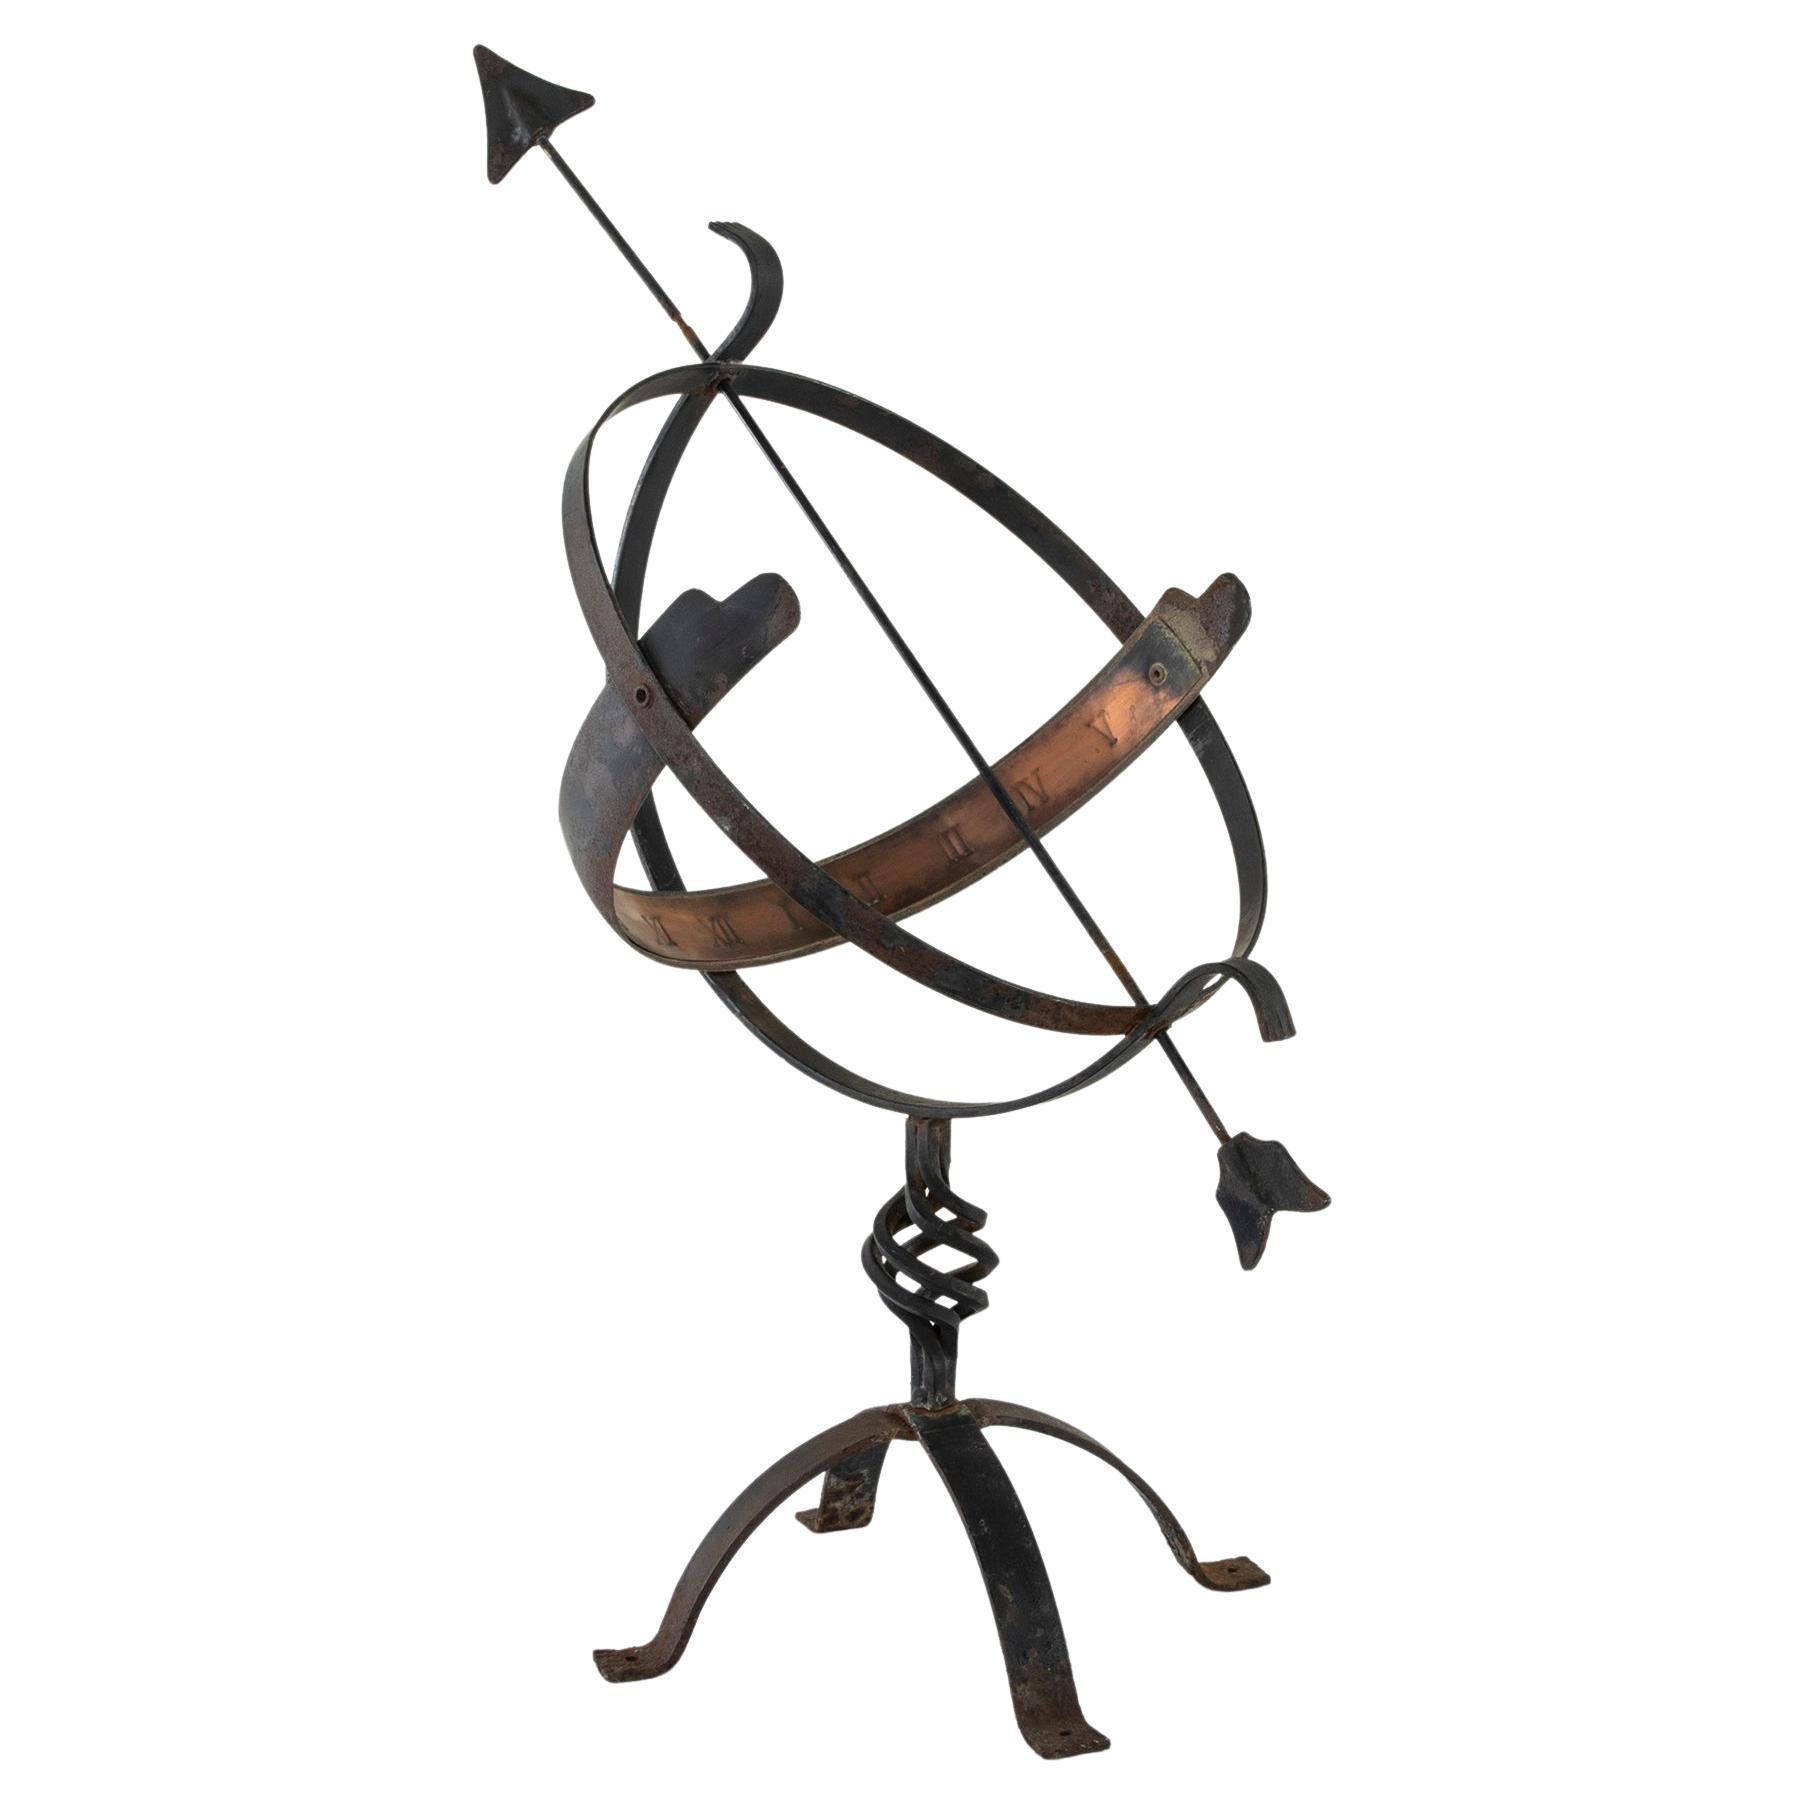 French Iron and Copper Armillary Sphere or Sundial circa 1900